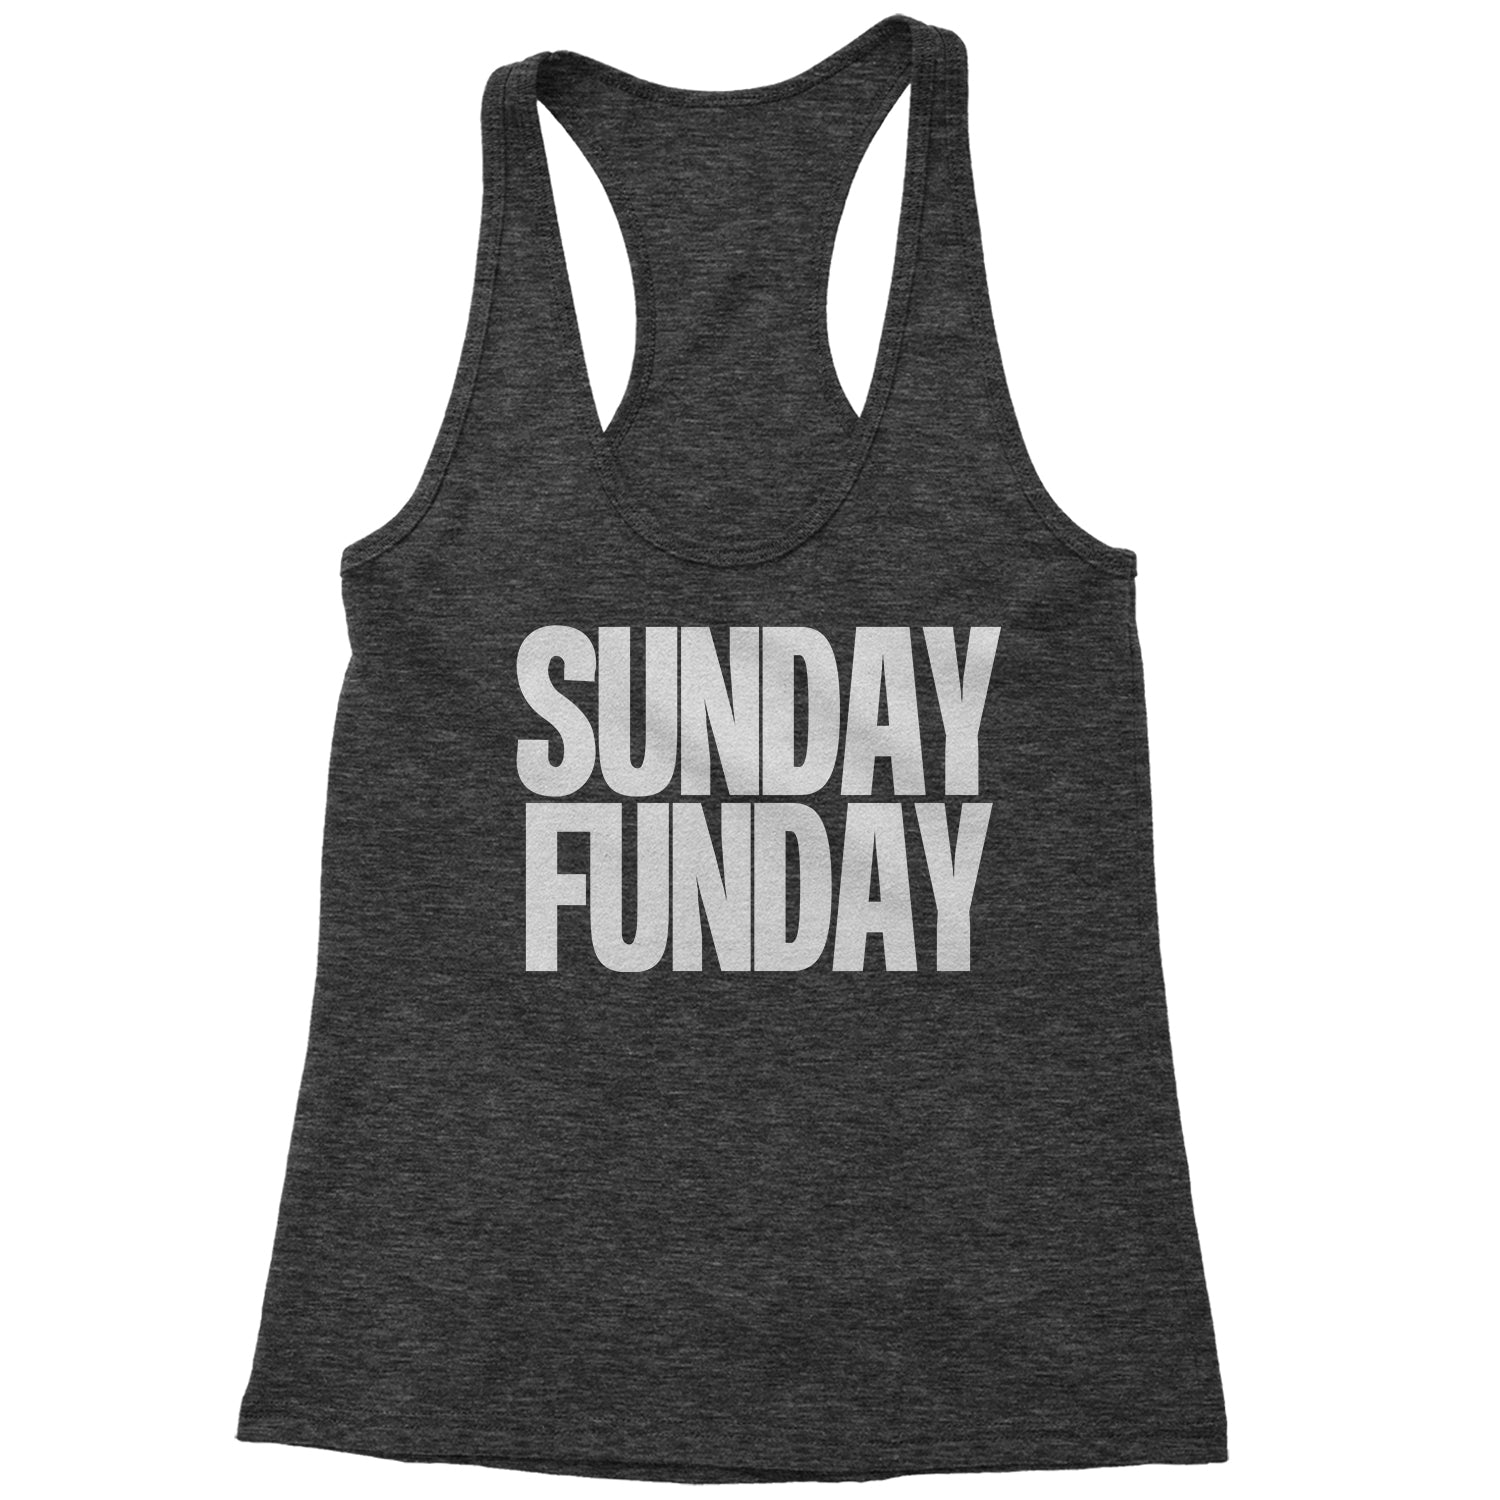 Sunday Funday Racerback Tank Top for Women day, drinking, fun, funday, partying, sun, Sunday by Expression Tees